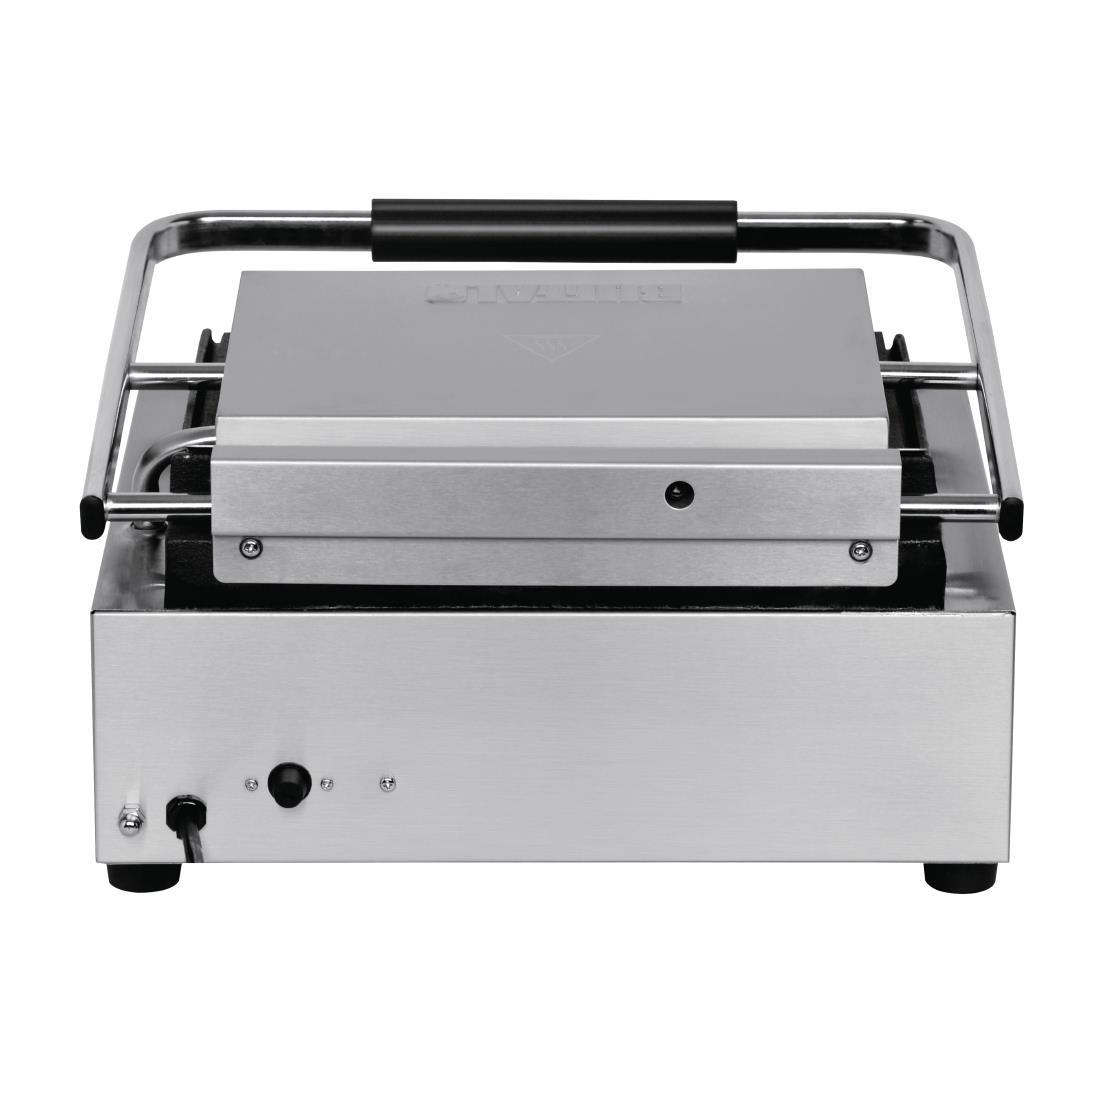 Buffalo Bistro Large Contact Grill - DY997  - 4